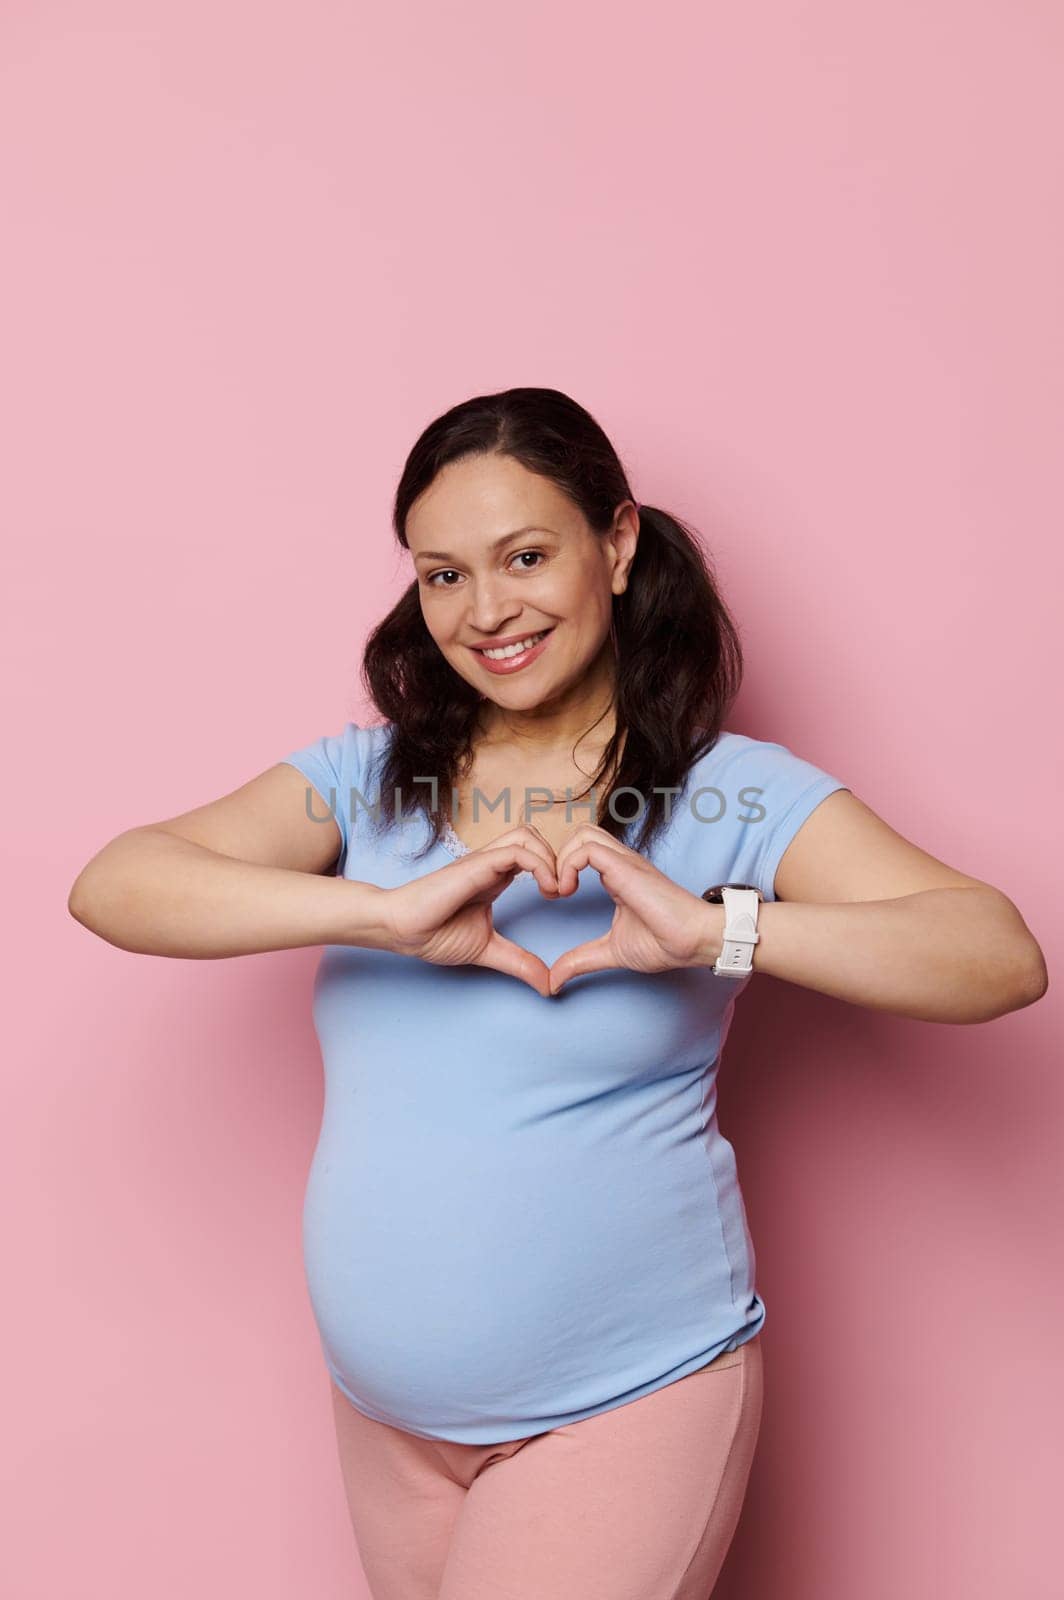 Joyful pregnant woman in blue t-shirt, gestures with hands, showing heart shape with fingers, smiles broadly looking at camera, isolated pink background. Pregnancy trimester third. Maternity lifestyle